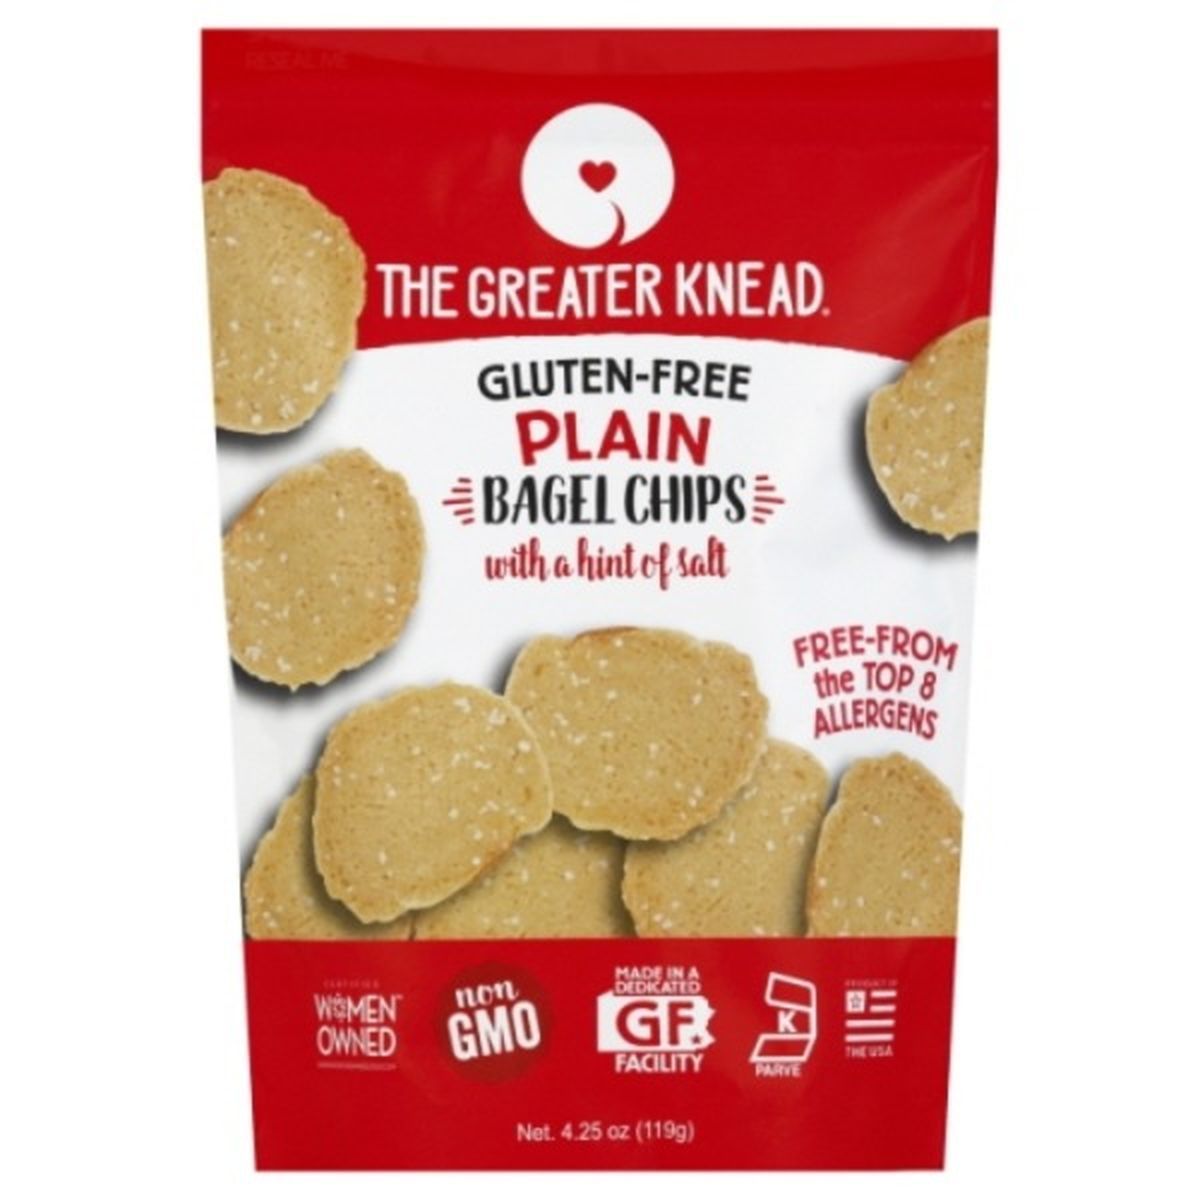 Calories in The Greater Knead Bagel Chips, Gluten-Free, Plain